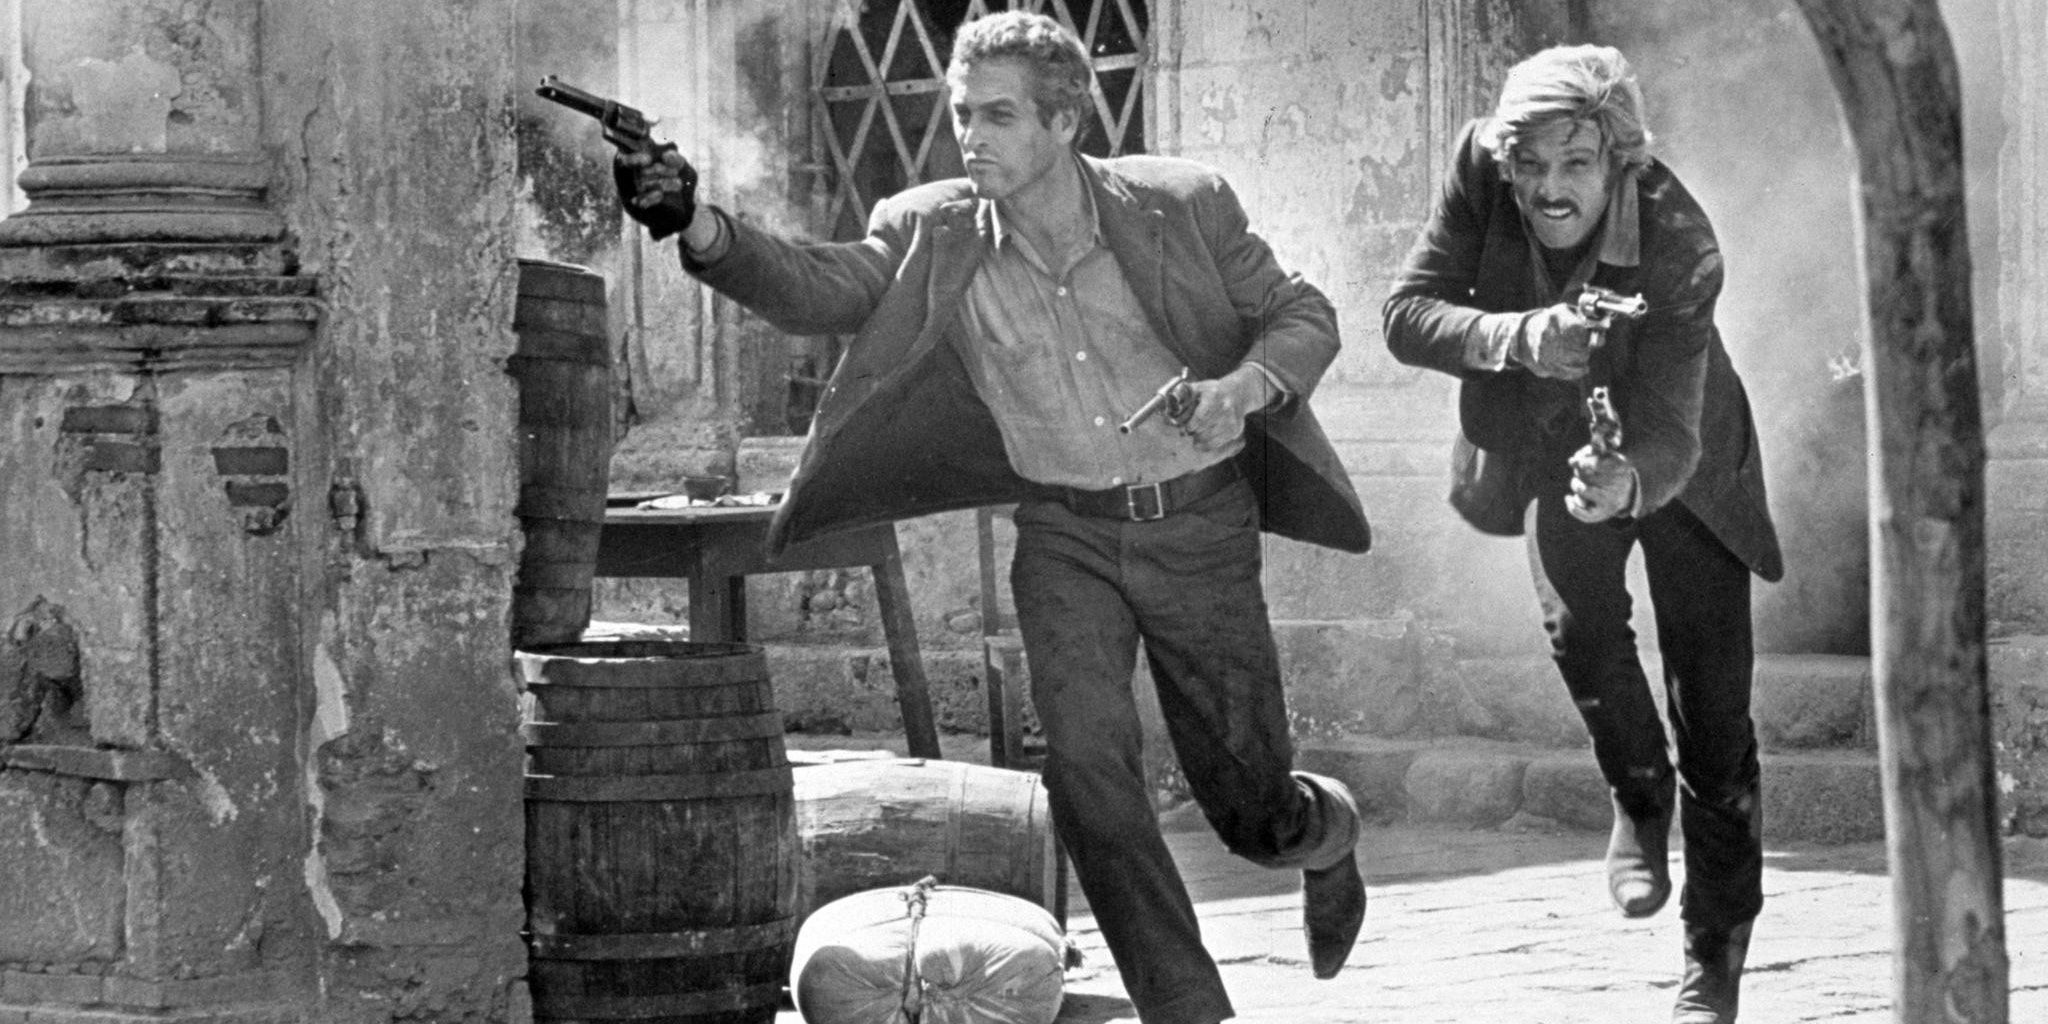 Butch and Sundance run out of the barn in Butch Cassidy And The Sundance Kid